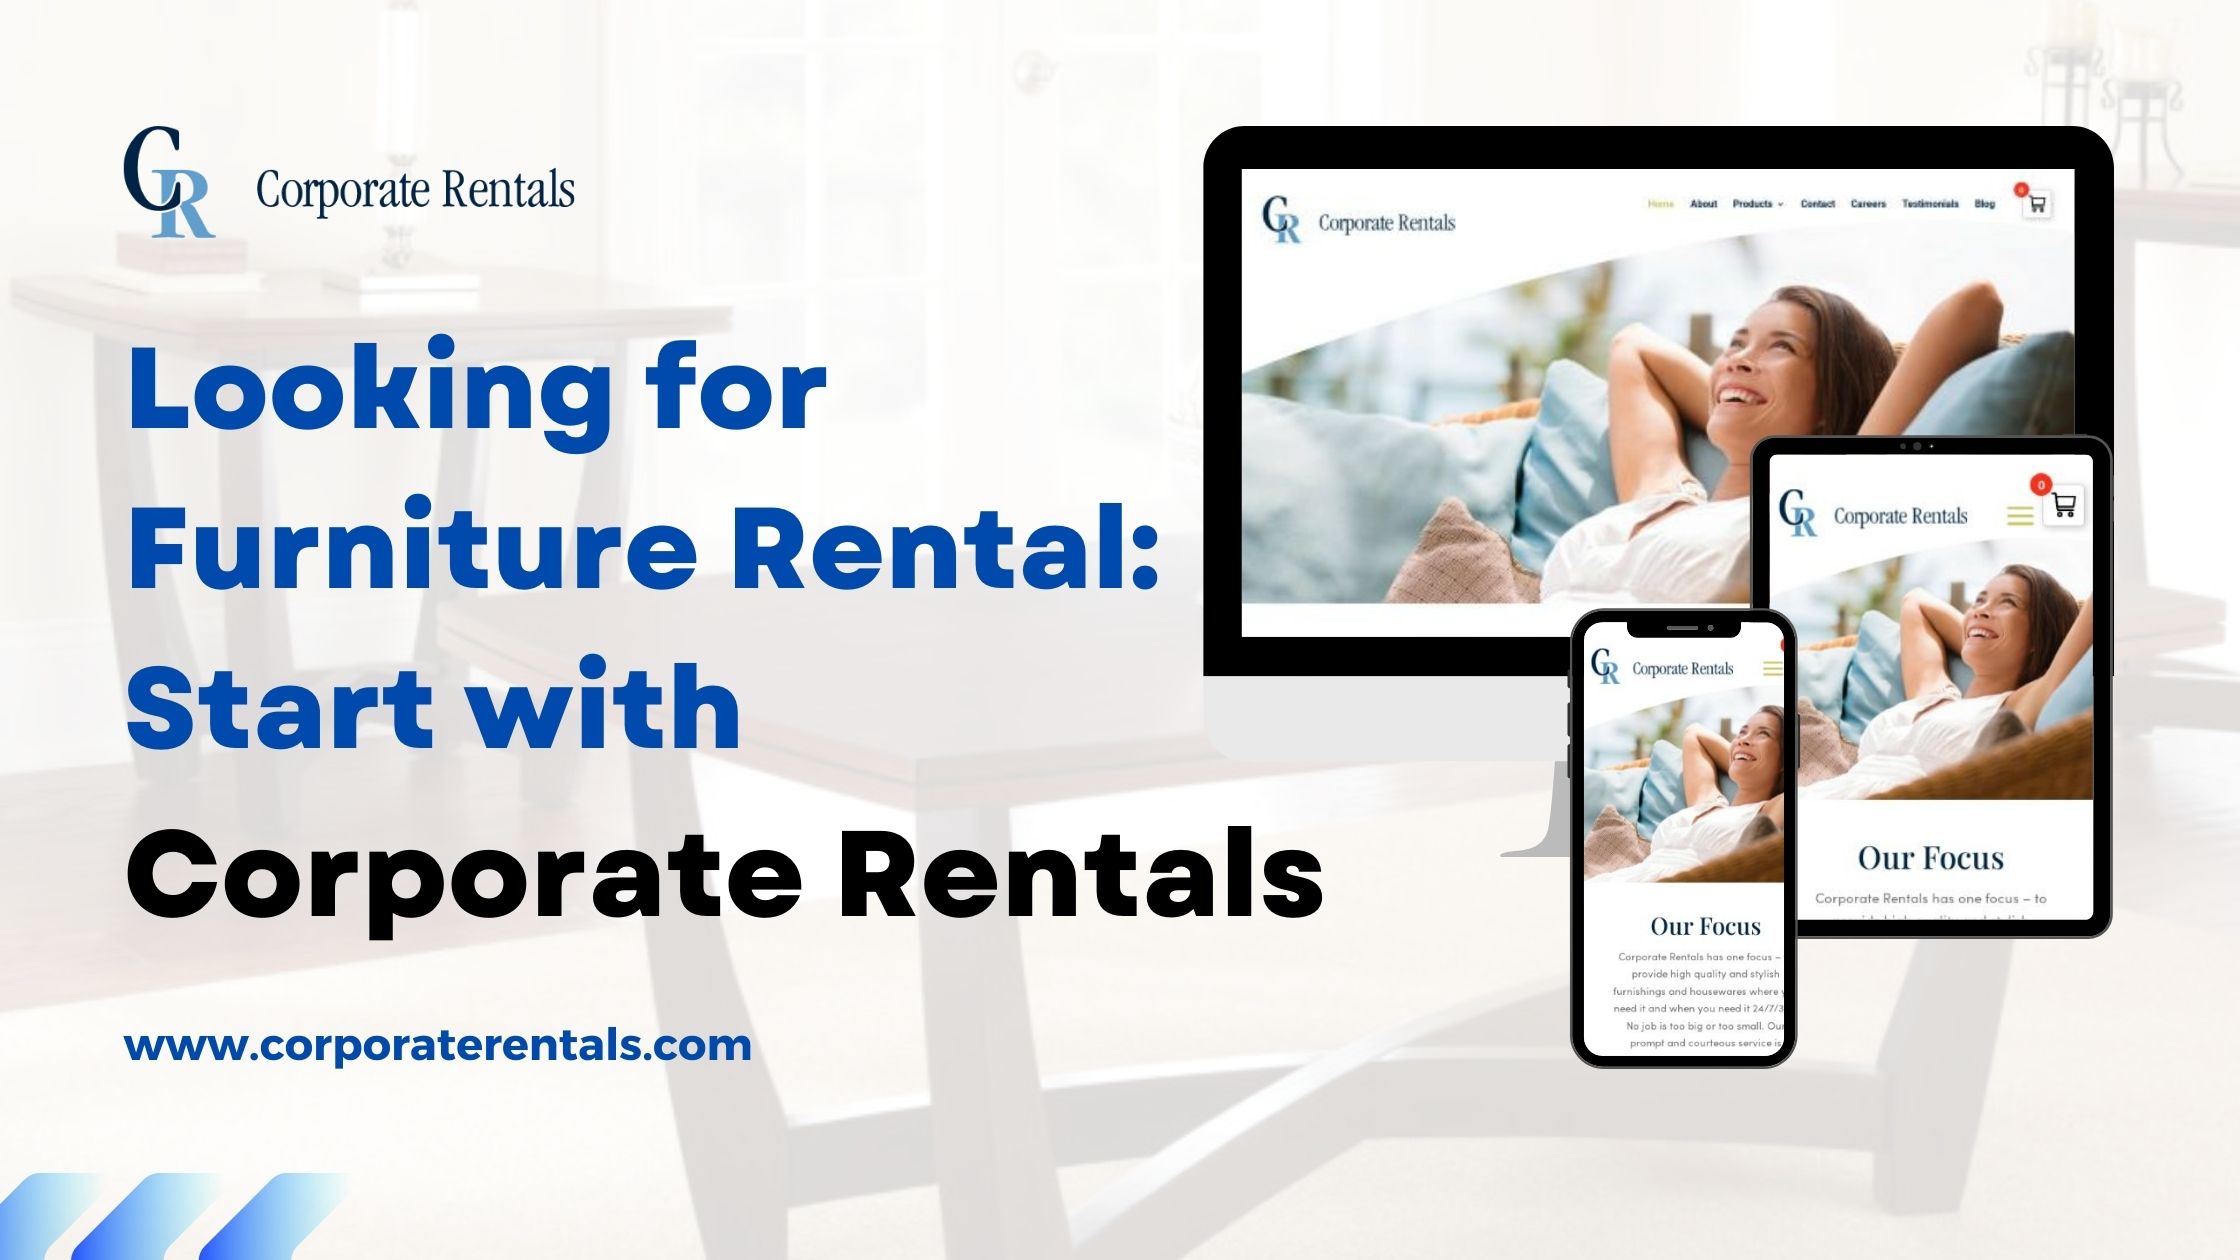 Looking for Furniture Rental: Start with Corporate Rentals